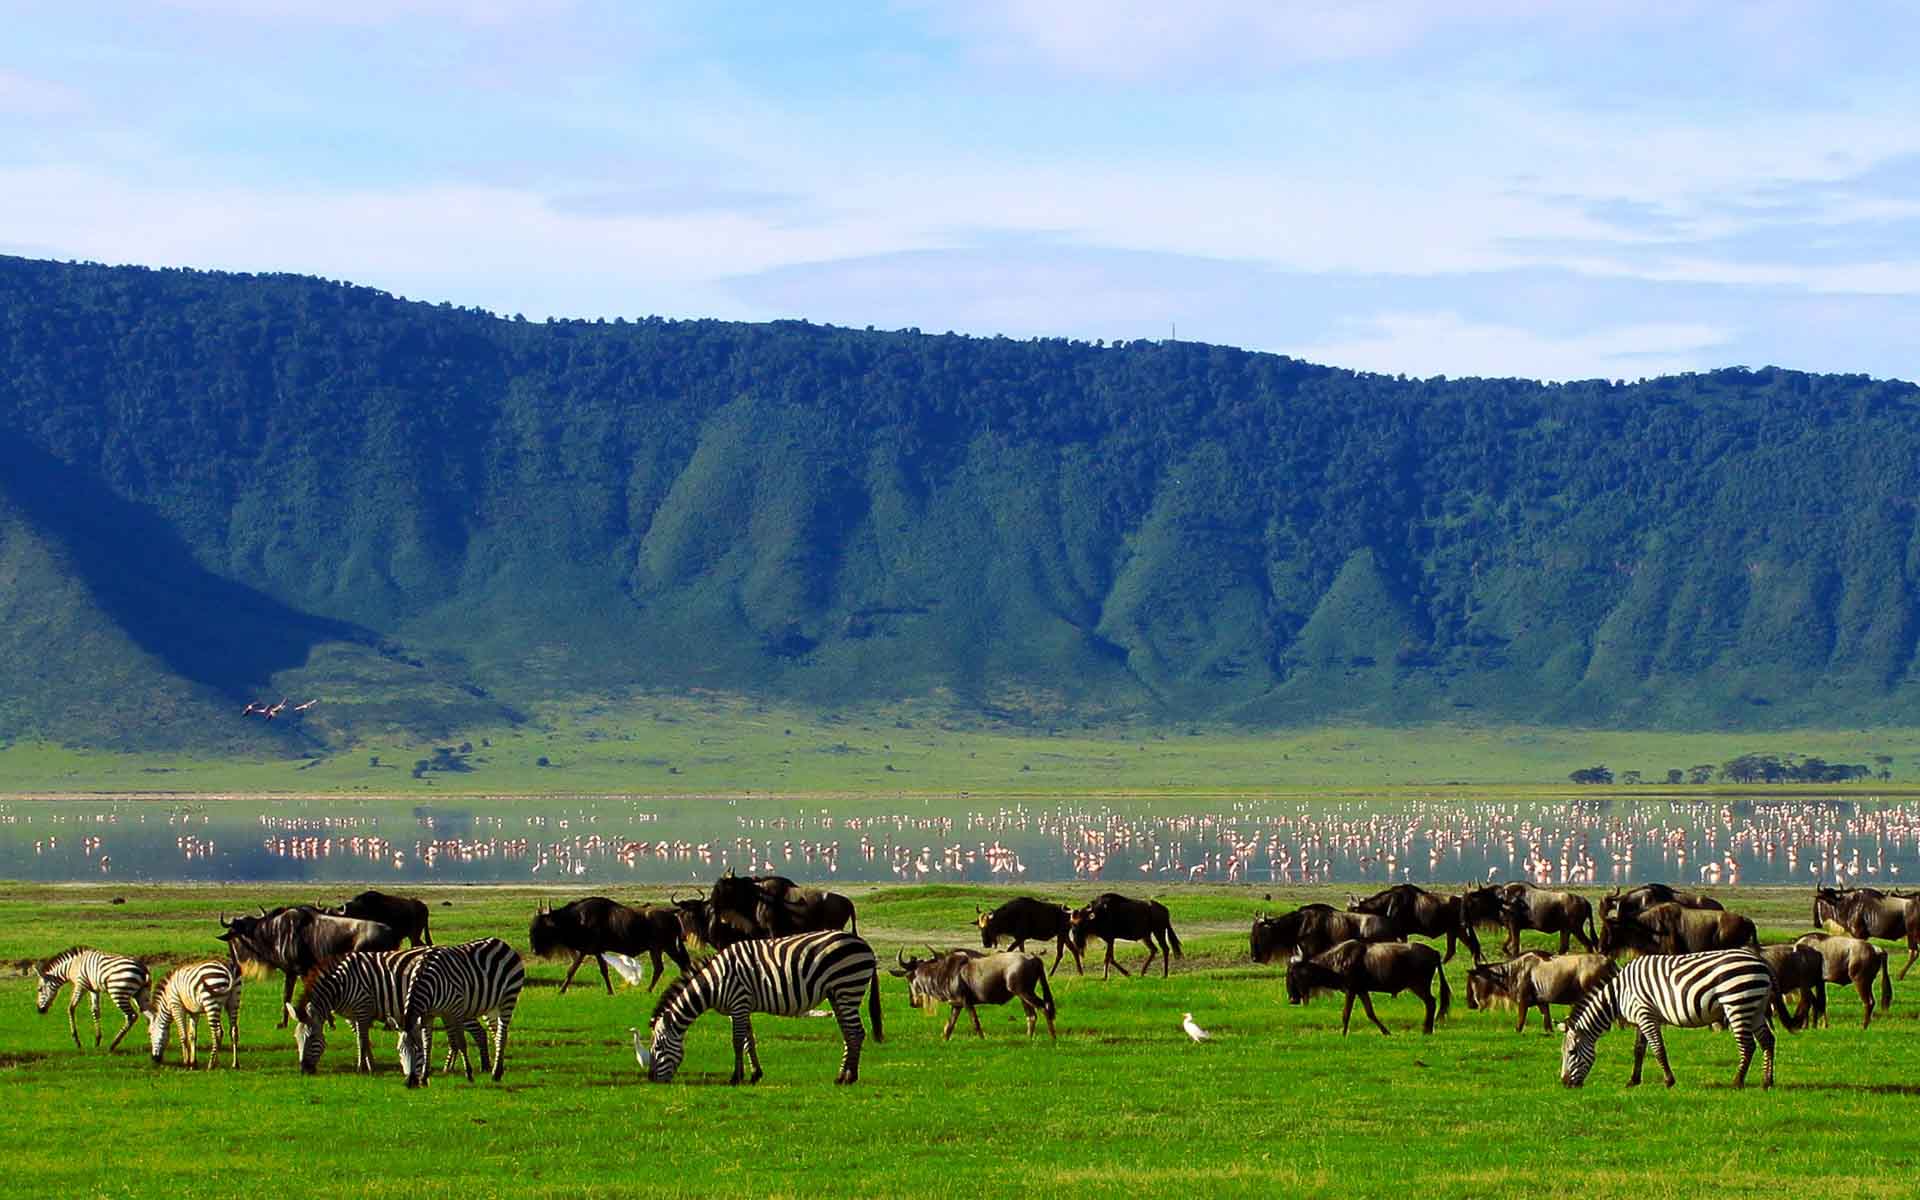 Plains game and flamingos in the Ngorongoro Crater – one of the Seven Natural Wonders of Africa.